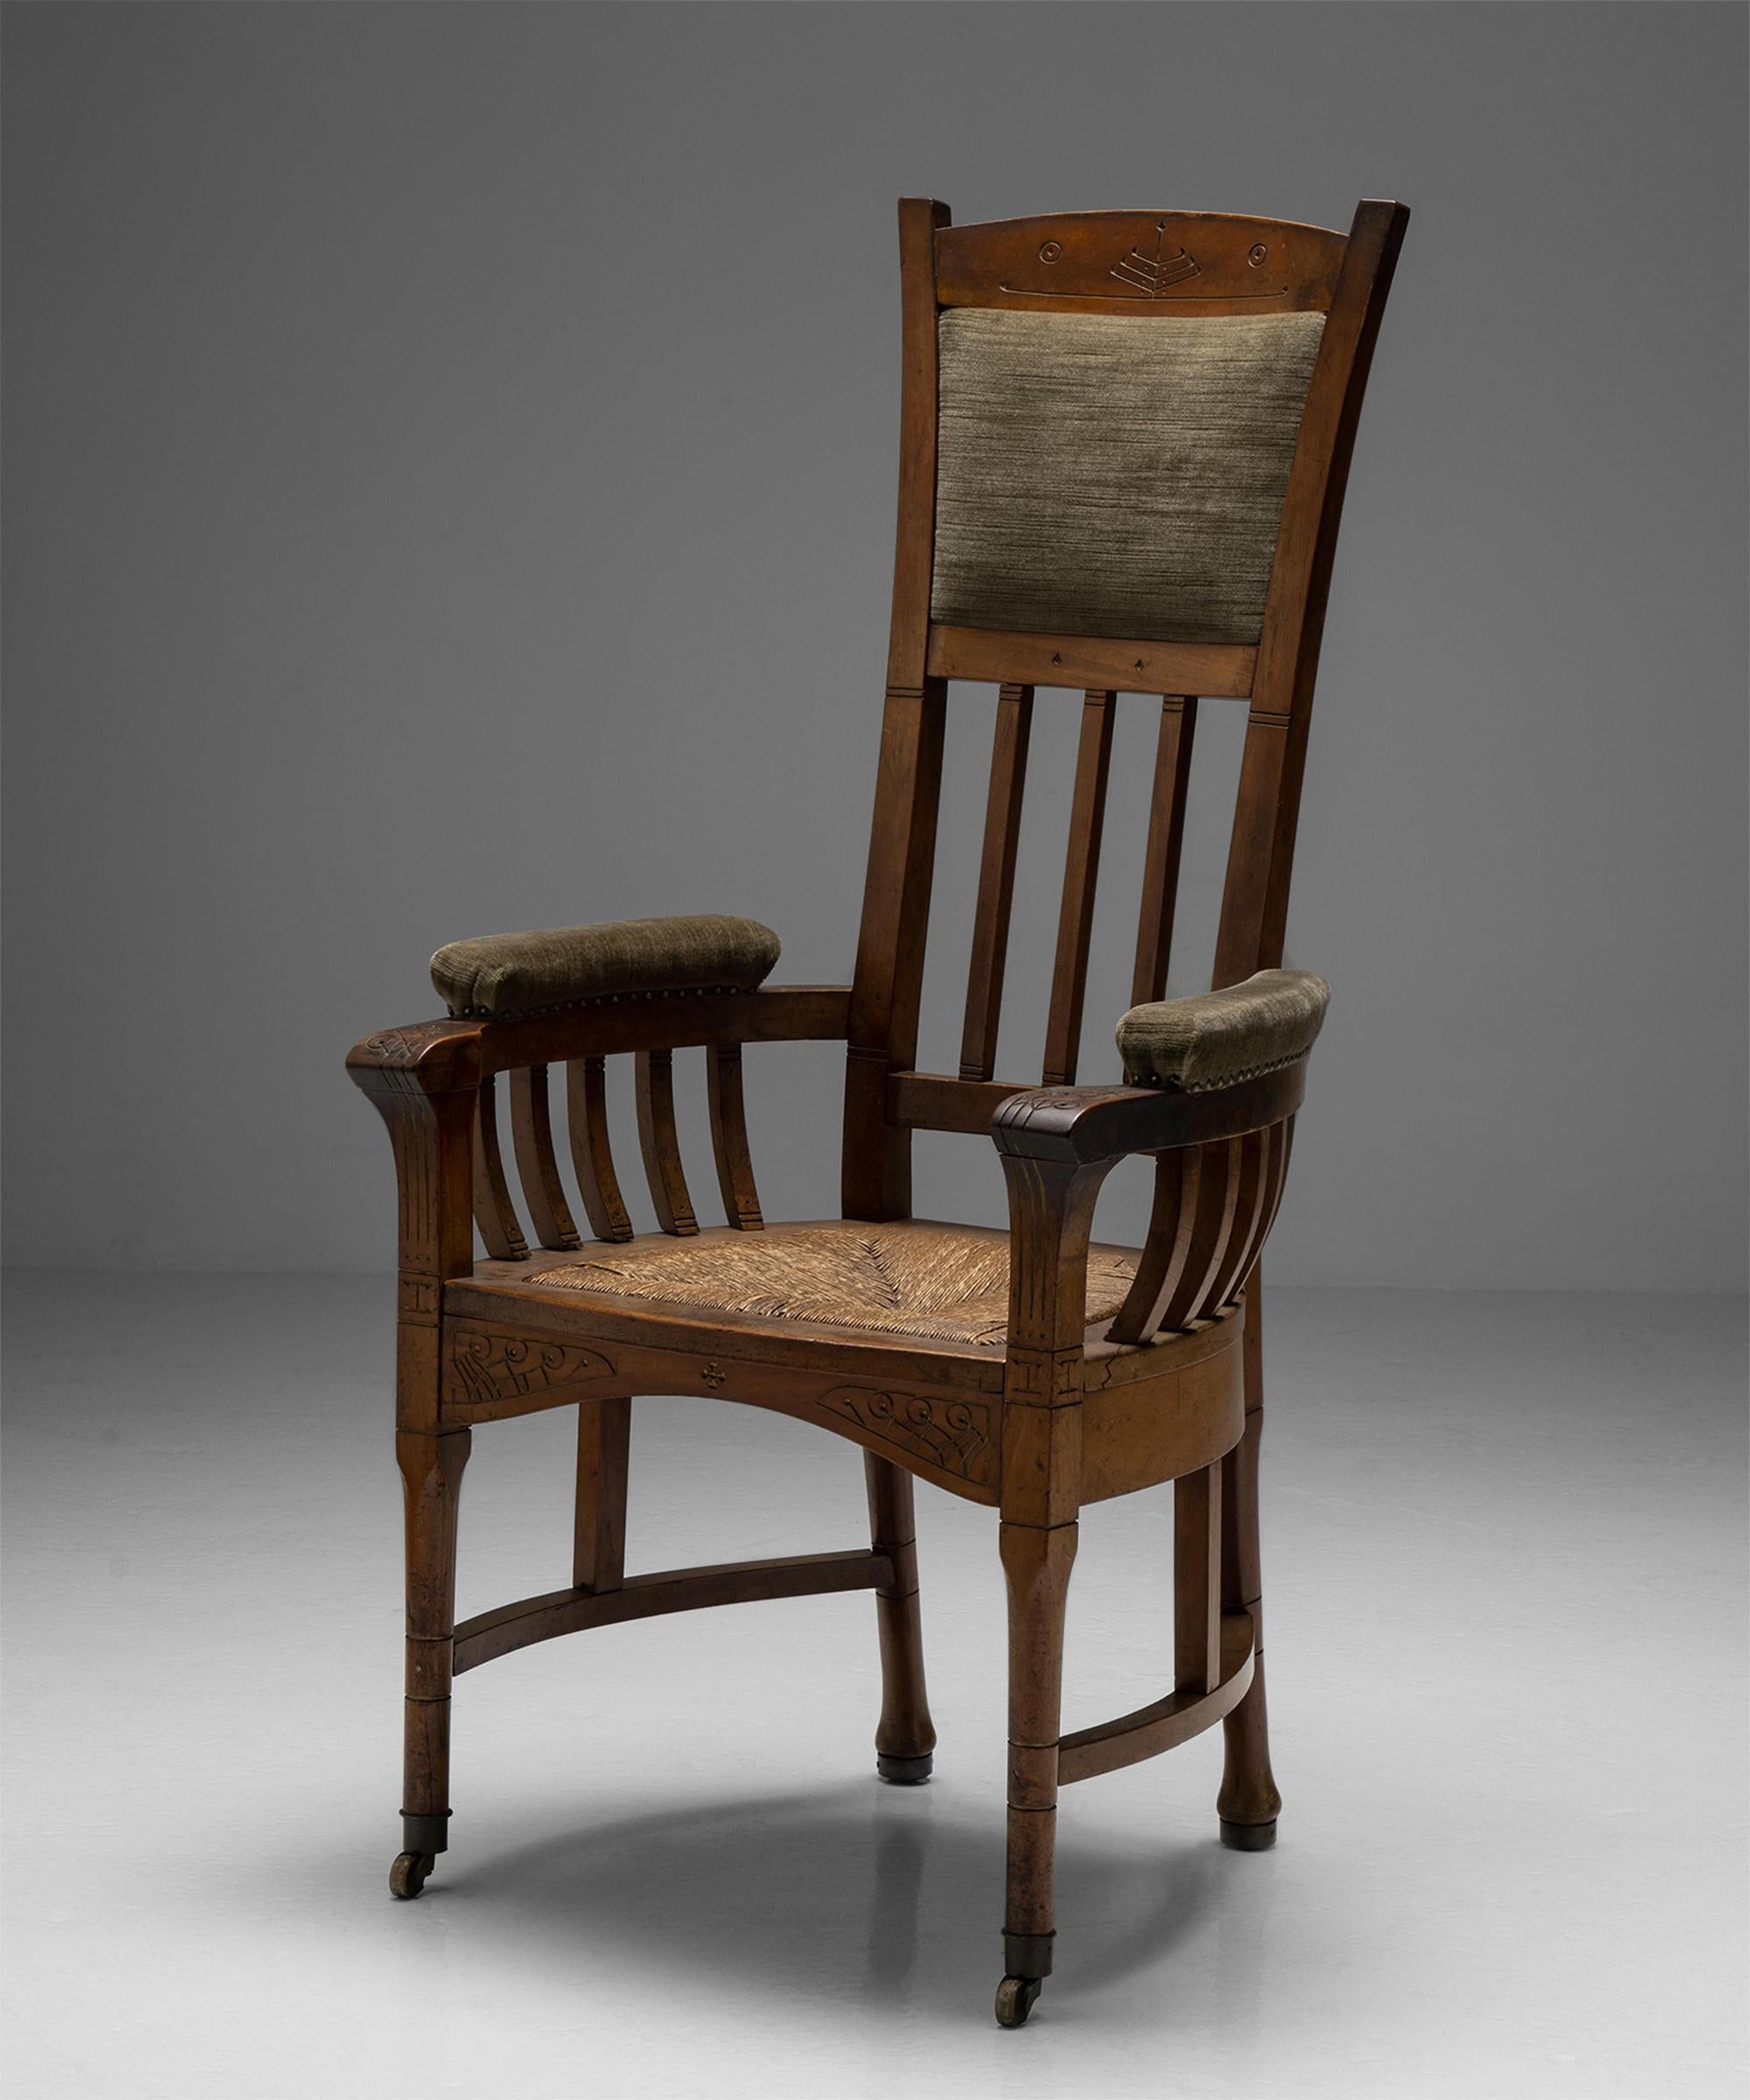 Arts & Crafts armchair no.1

France Circa 1900

Museum quality carved wooden chair with rush seat, and upholstered head and arm rests.

Measures: 24.5